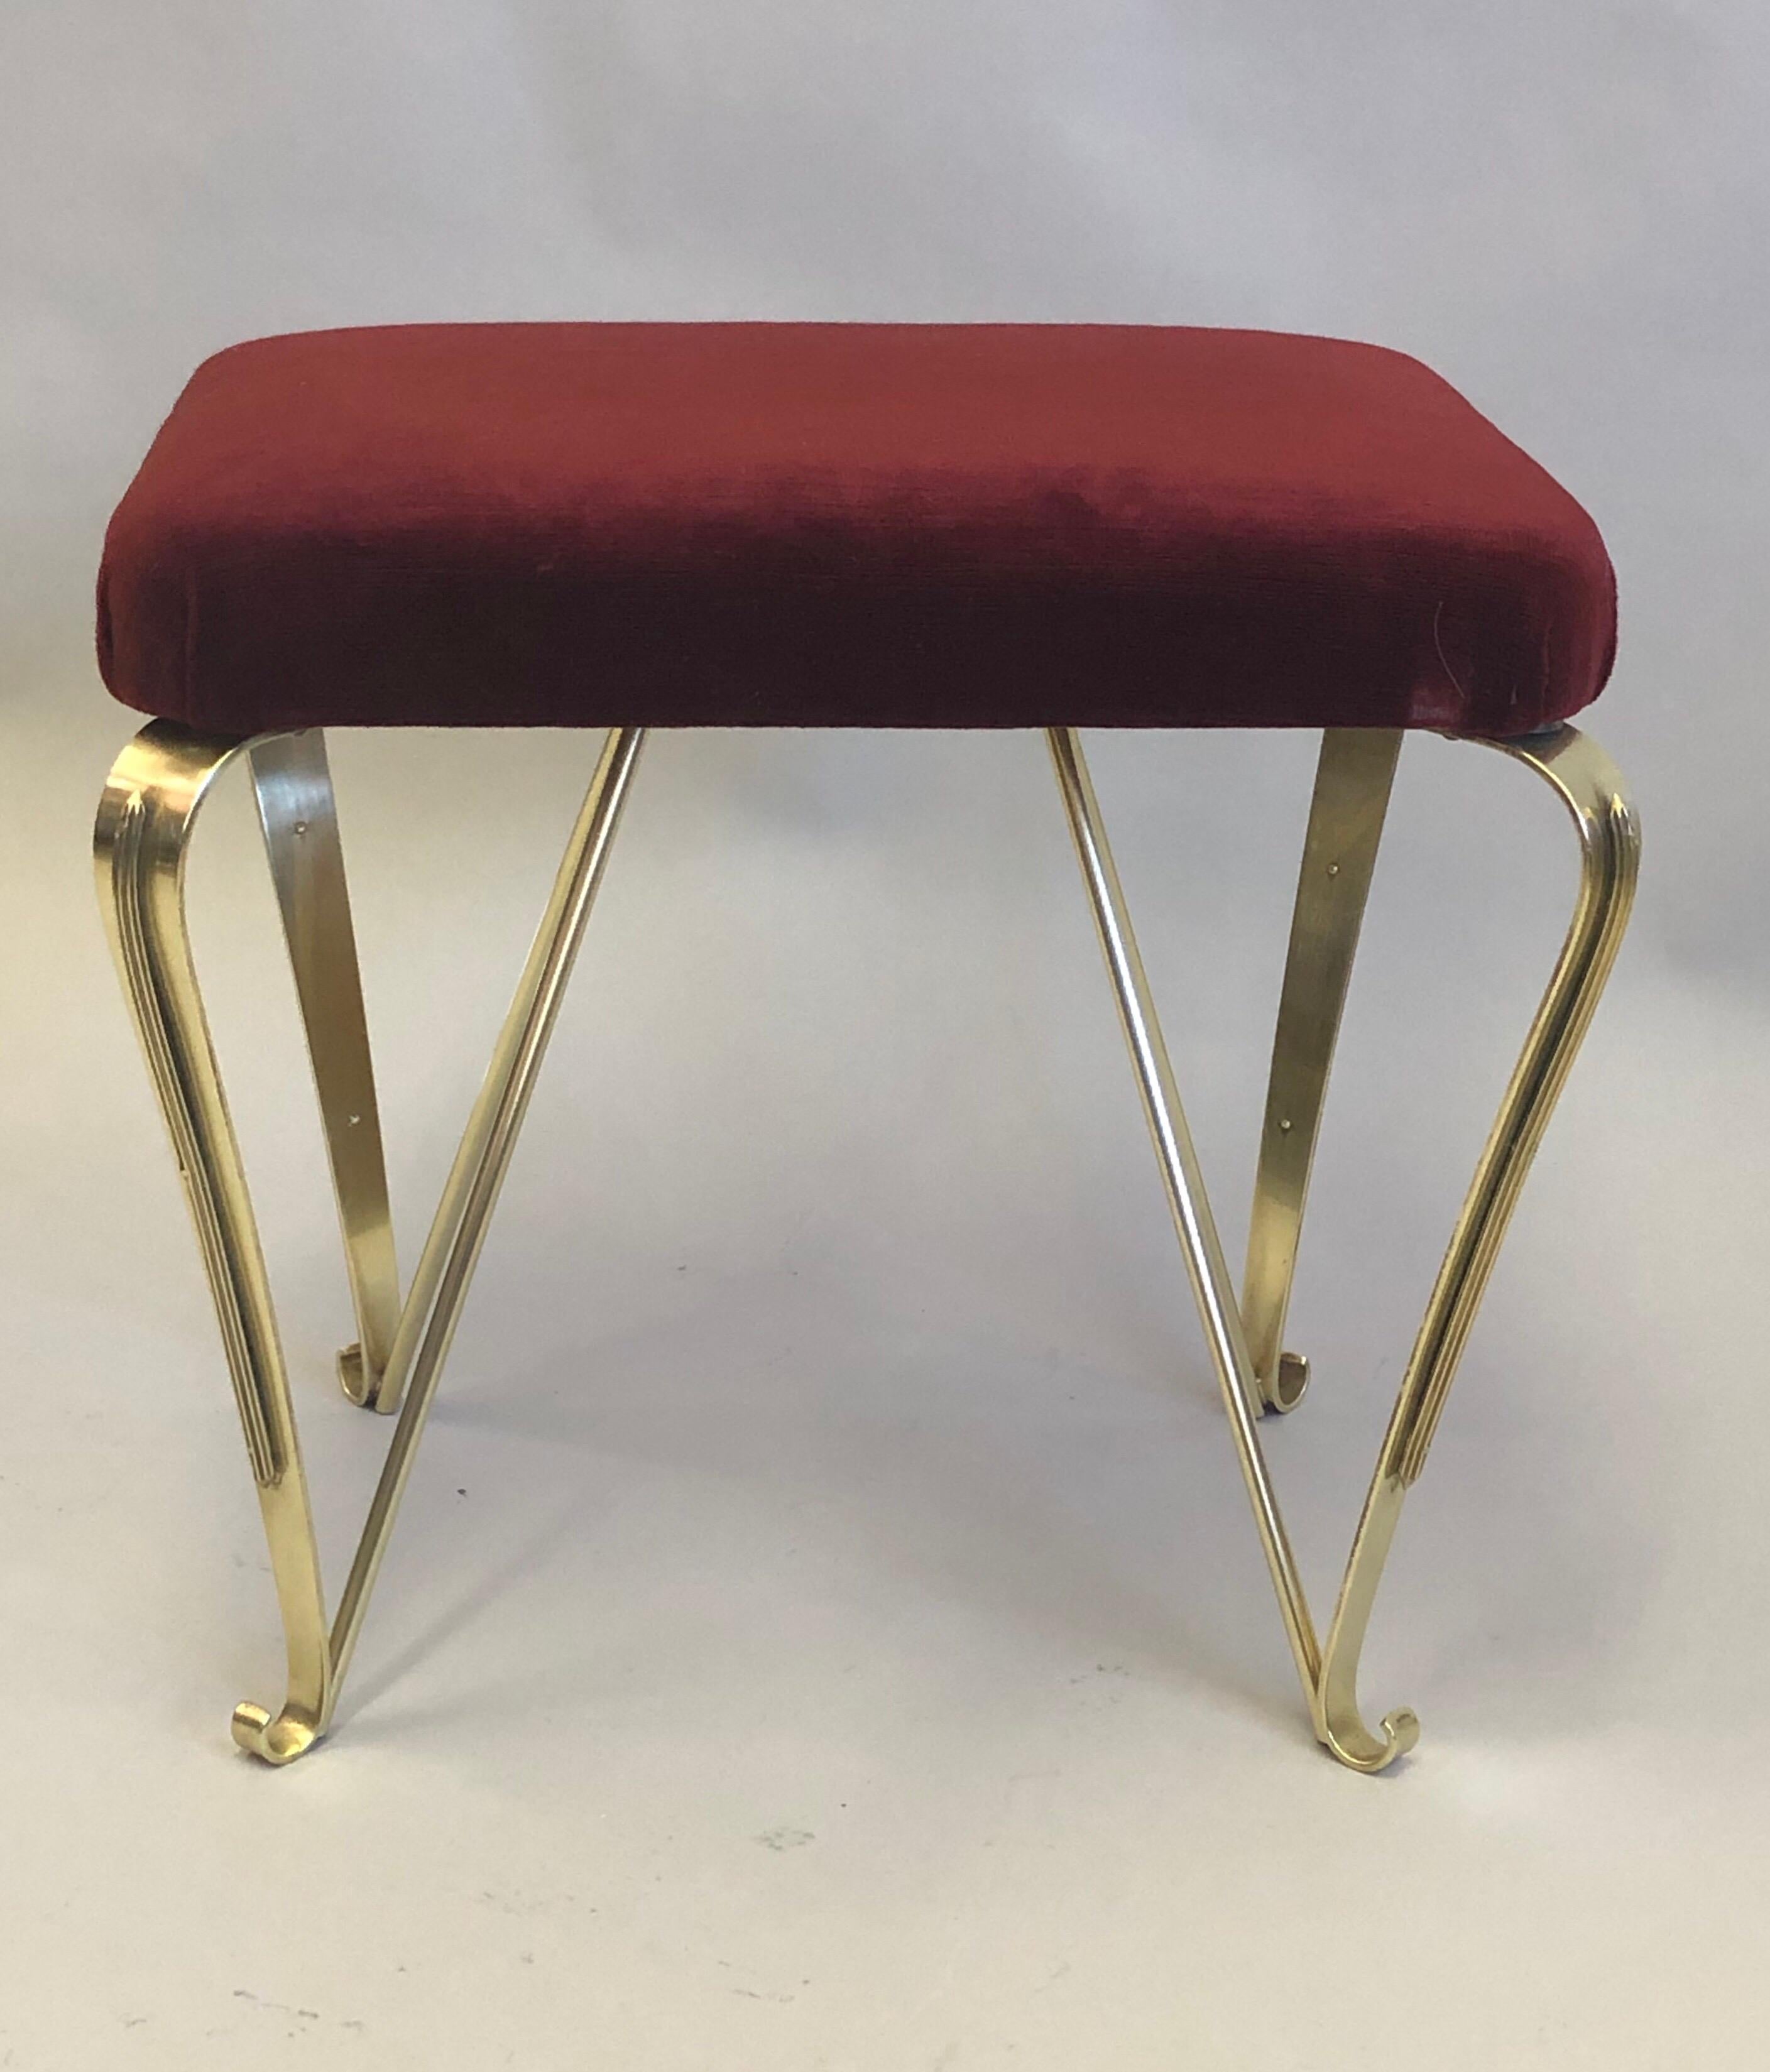 Pair of Italian Mid-Century Modern Neoclassical Solid Brass Benches by Jansen For Sale 3